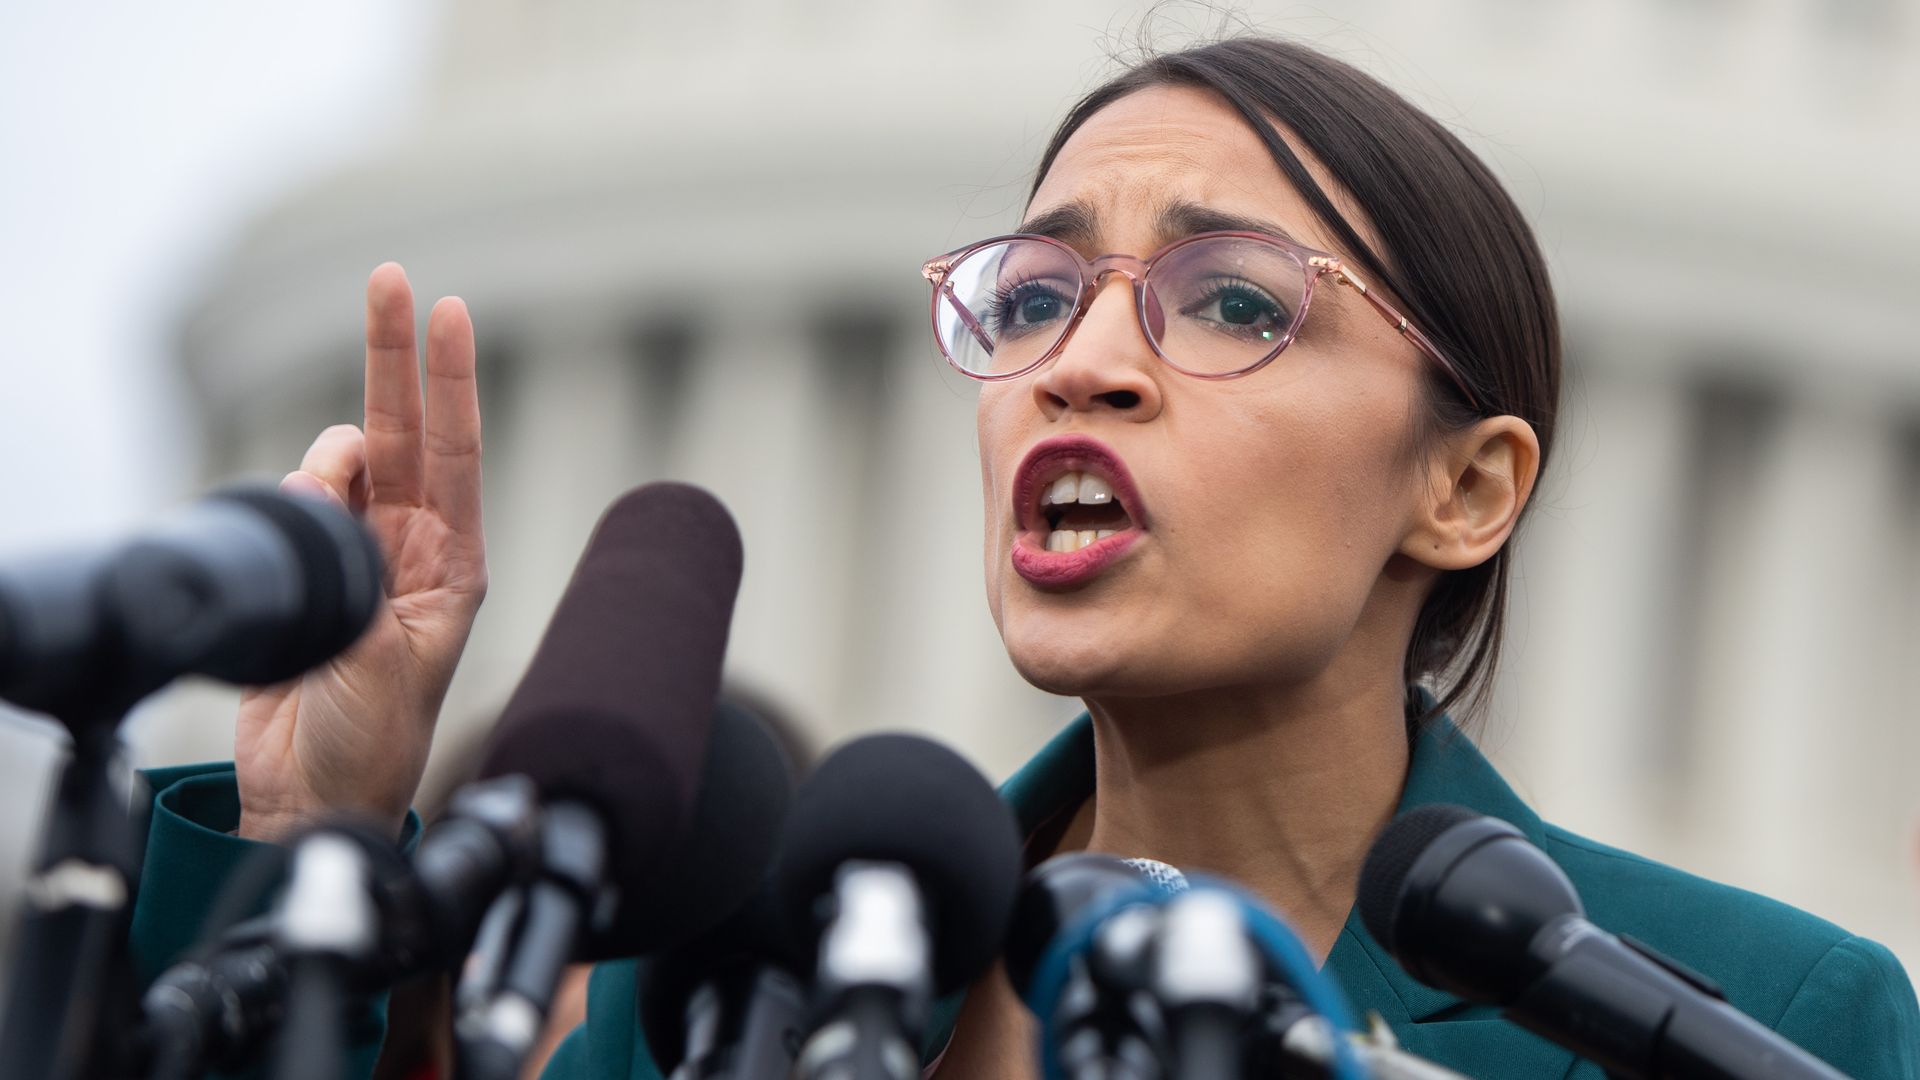 AOC describing the Green New Deal in front of Capitol Building